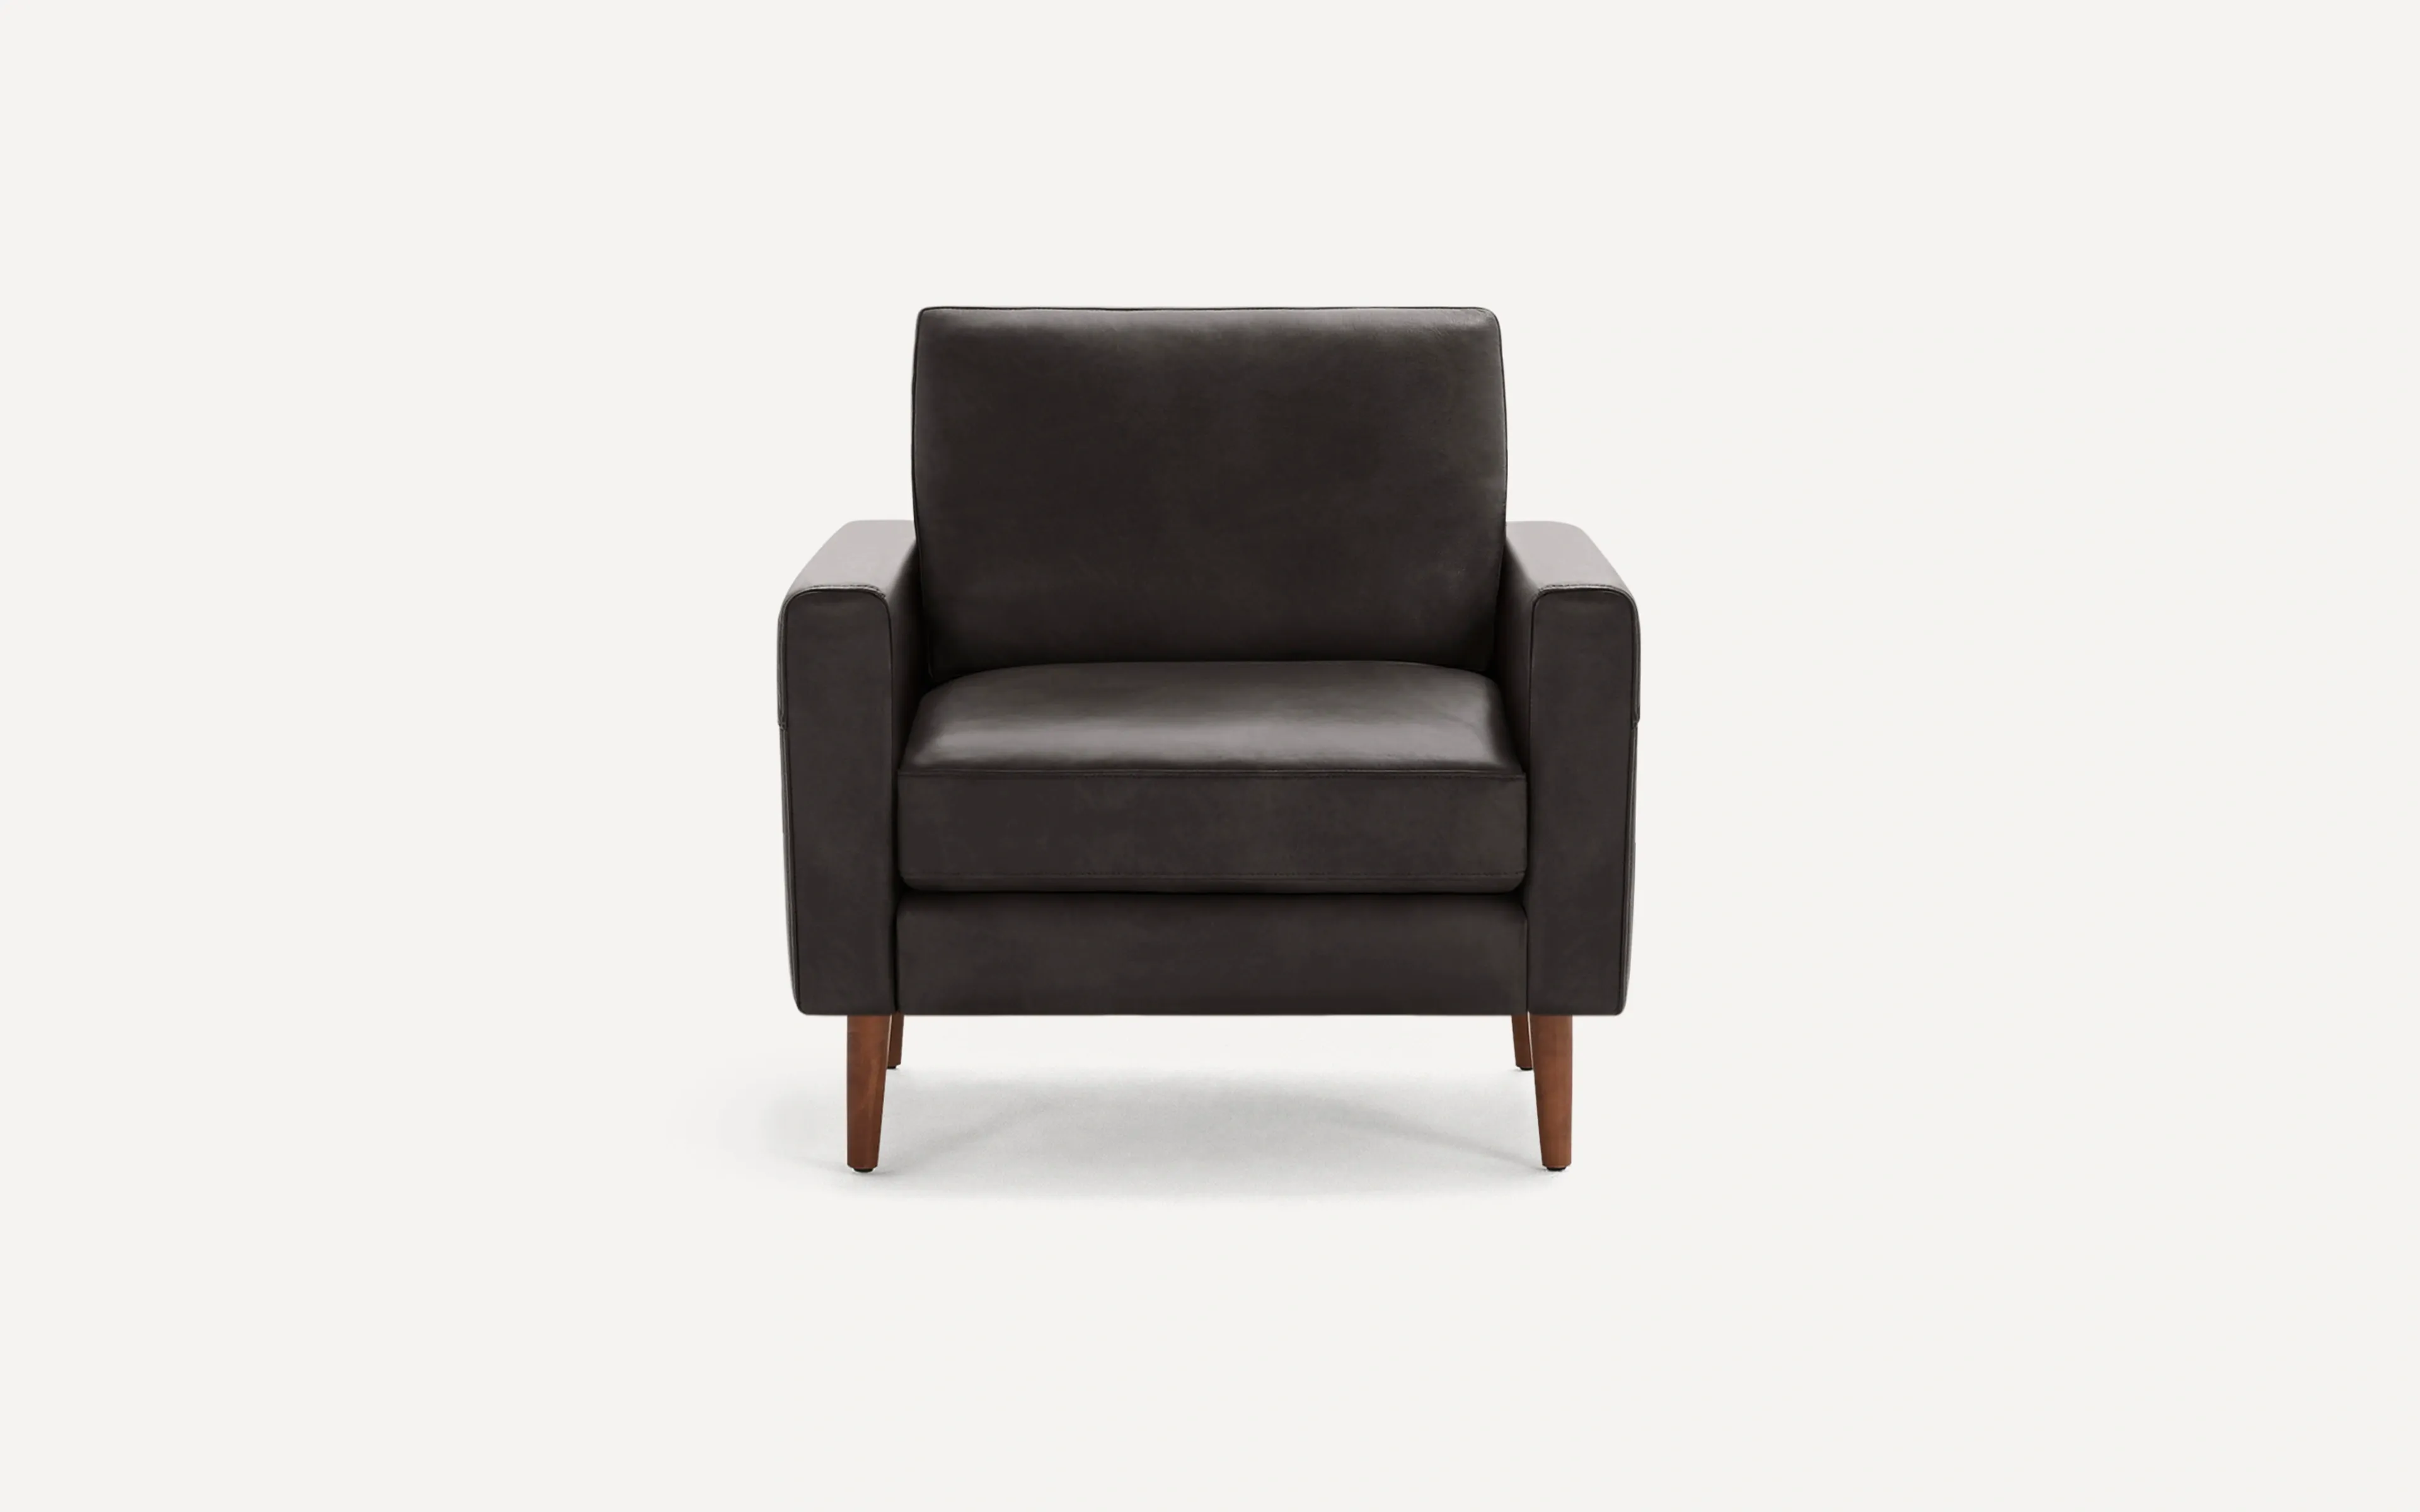 Original Nomad Armchair in Slate Leather